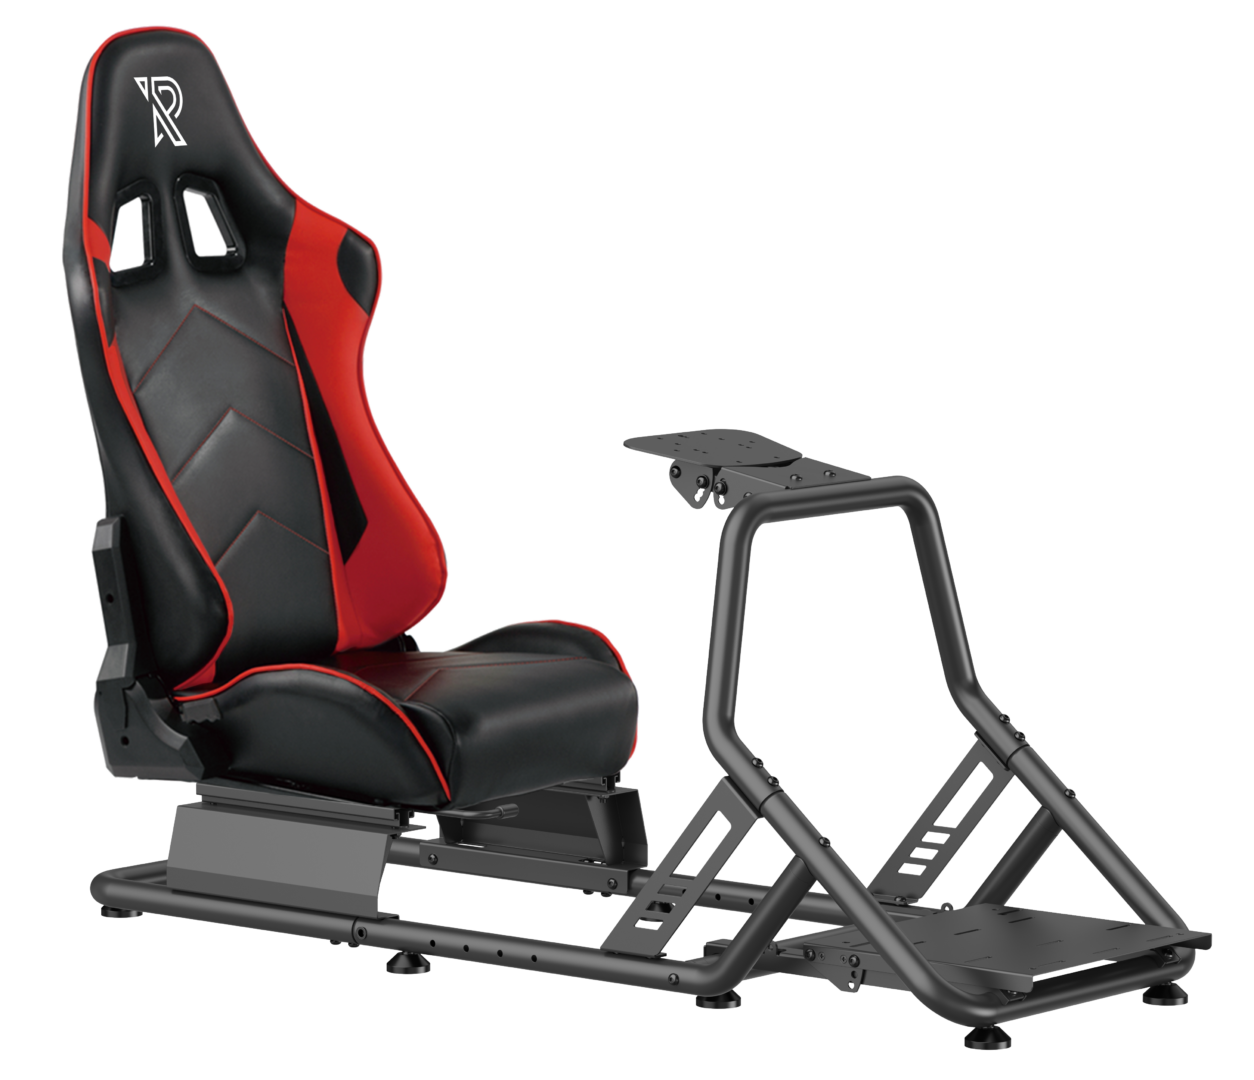 All Gaming Chairs